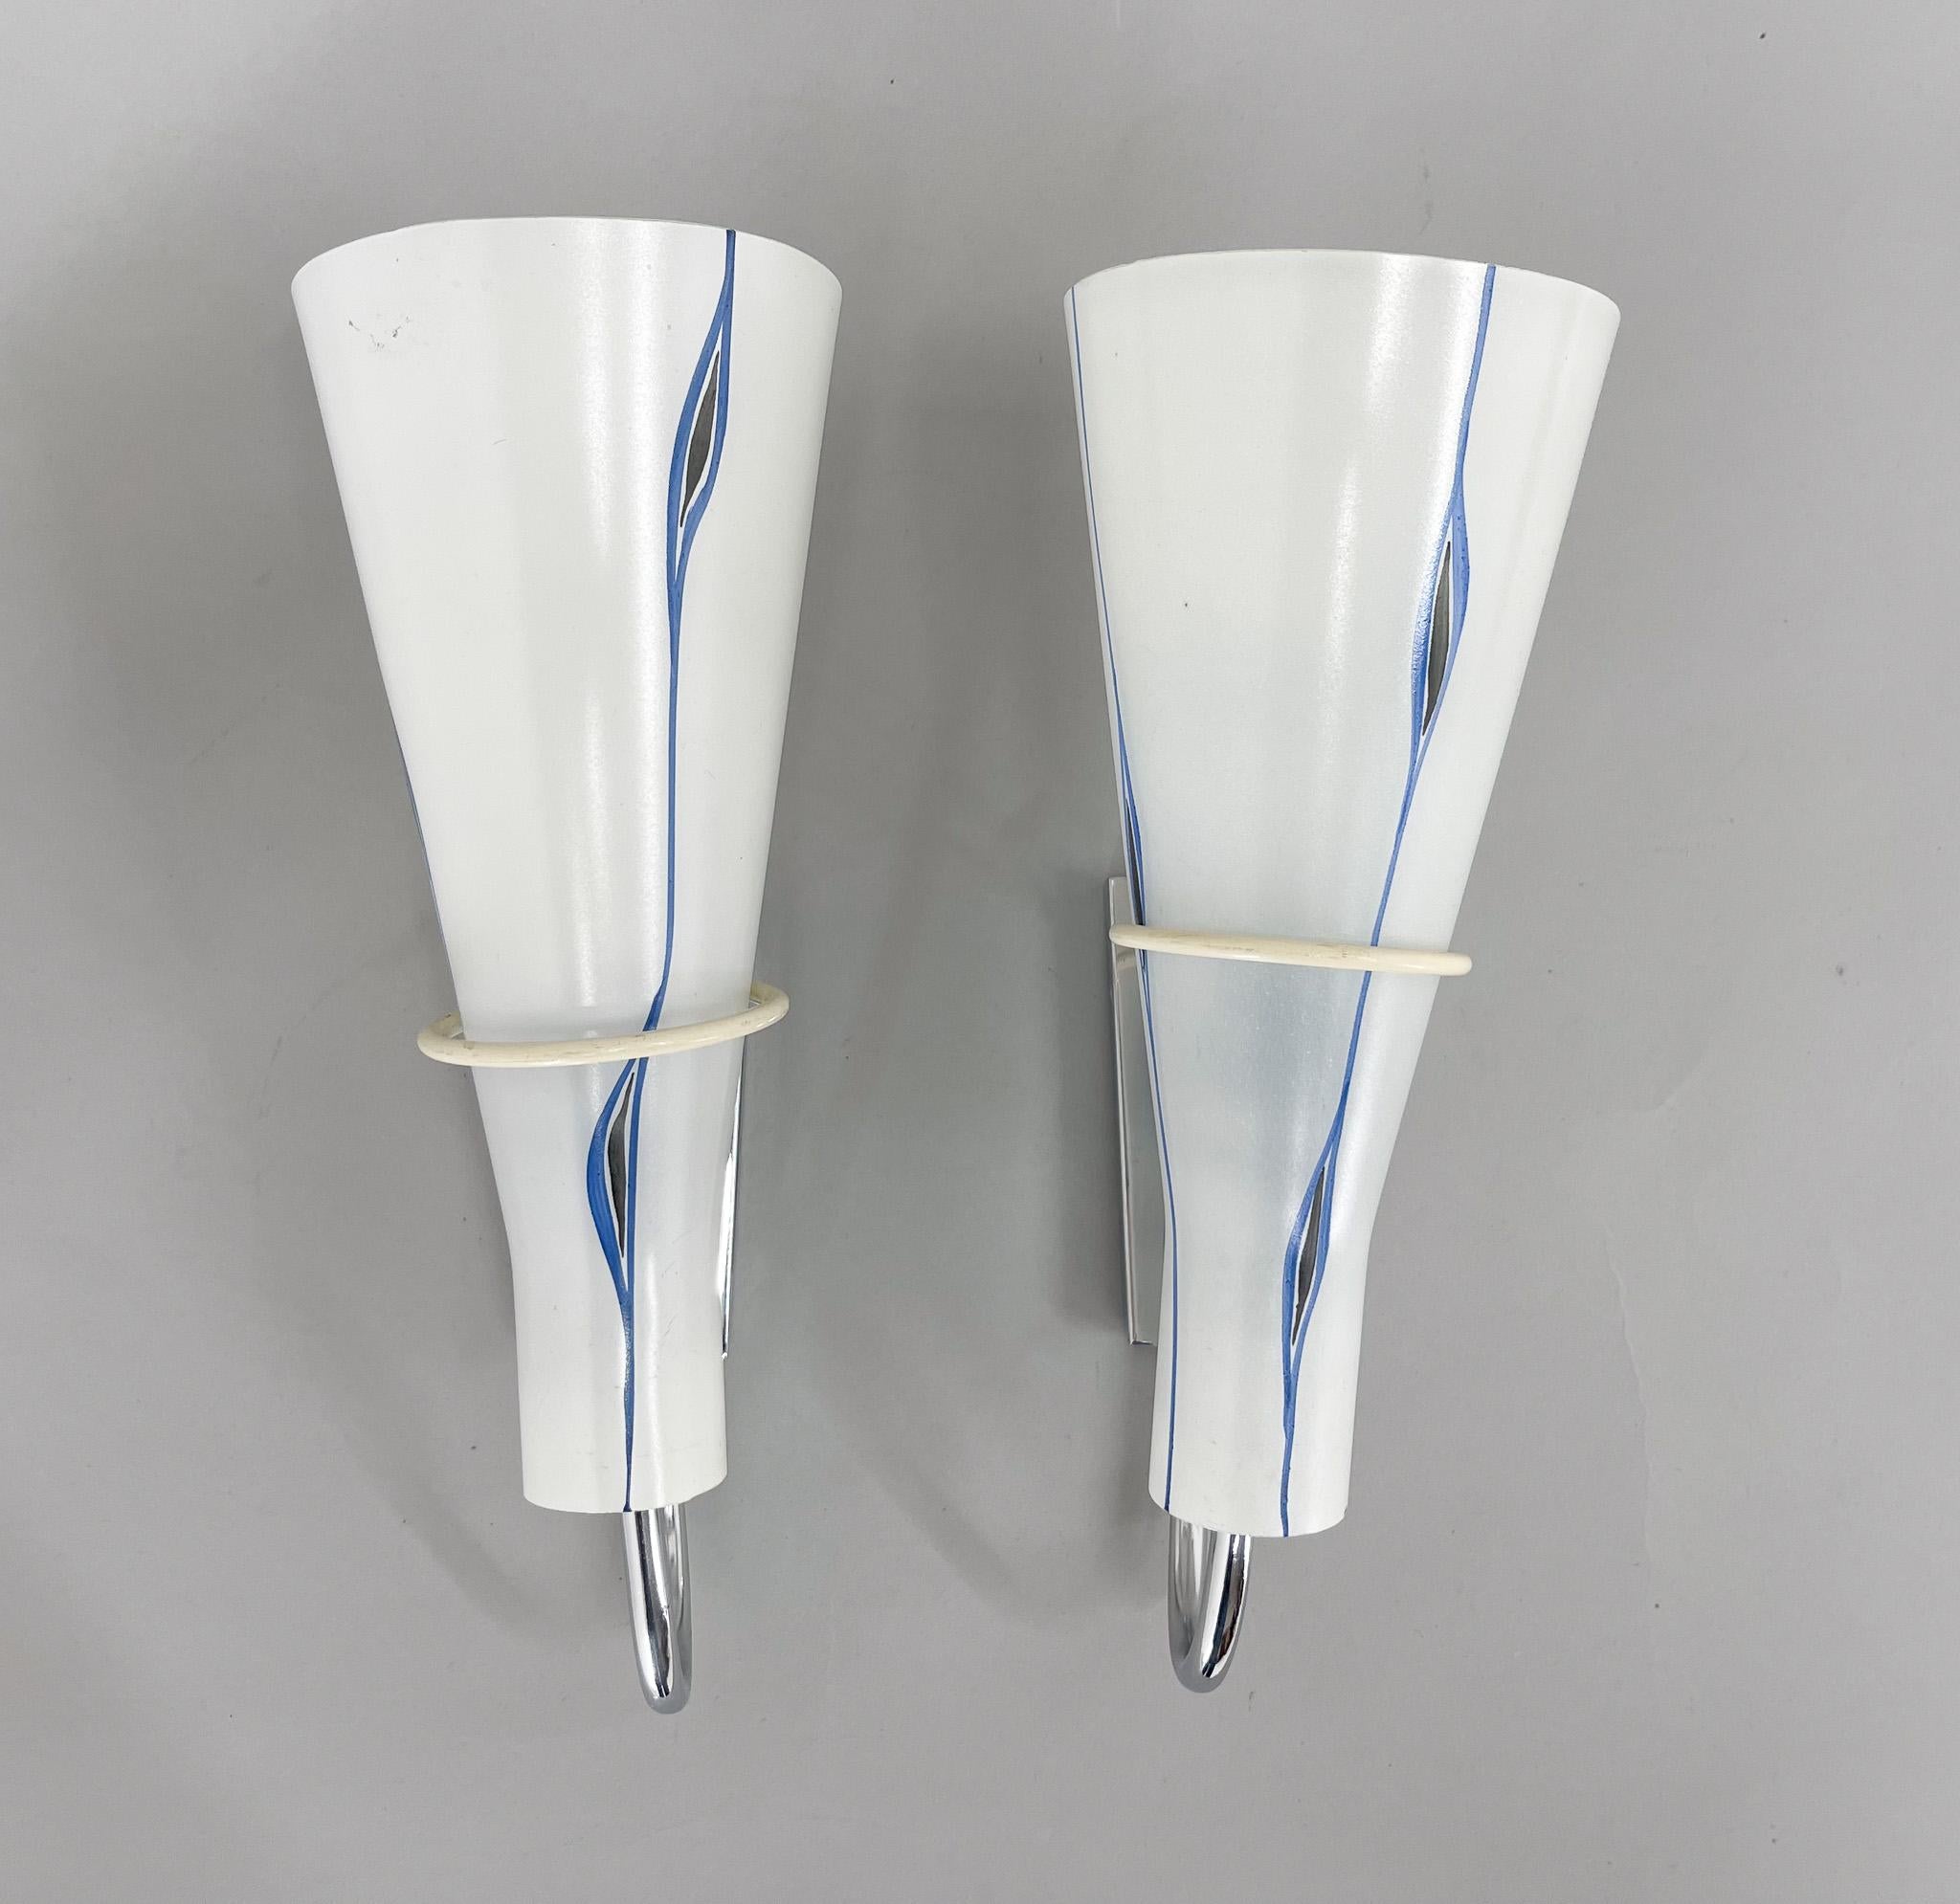 Metal Pair of 1960s Chrome & Glass Wall Lamps by Zukov, 2 Pairs Available For Sale